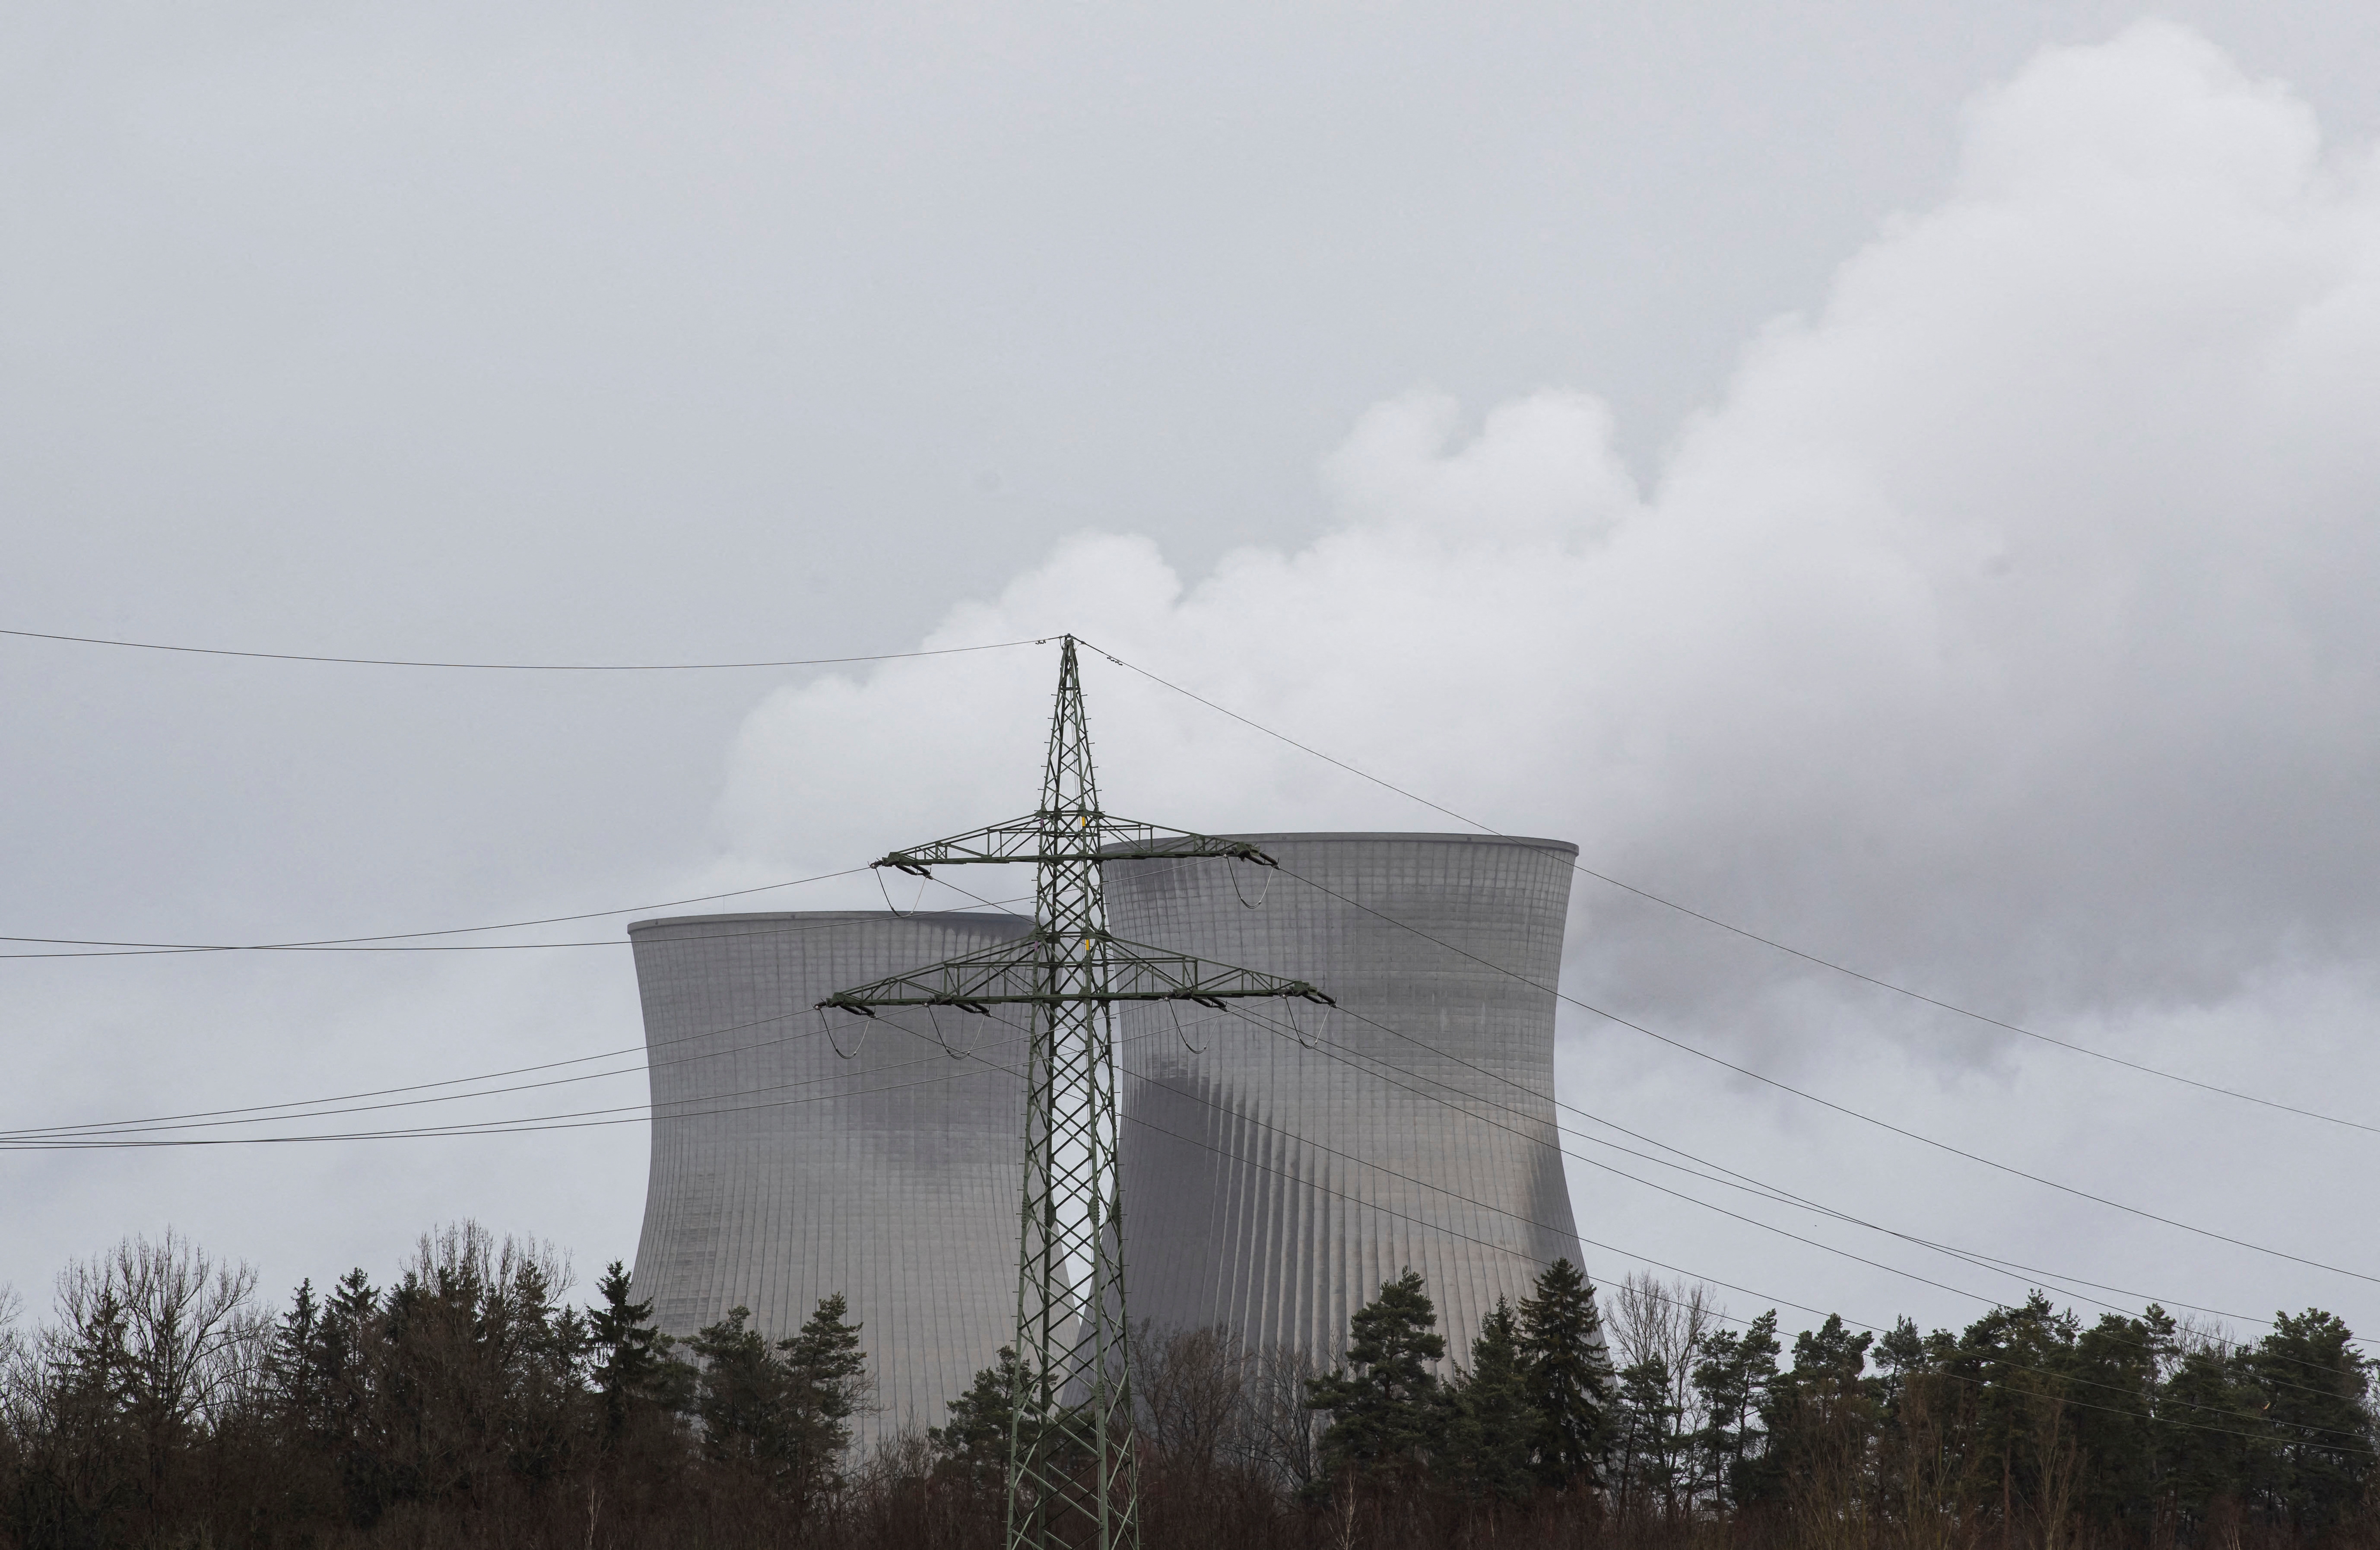 A general view of the nuclear power plant, whose last unit will be shut down at the turn of the year, in Gundremmingen, Germany, December 29, 2021. REUTERS/Lukas Barth